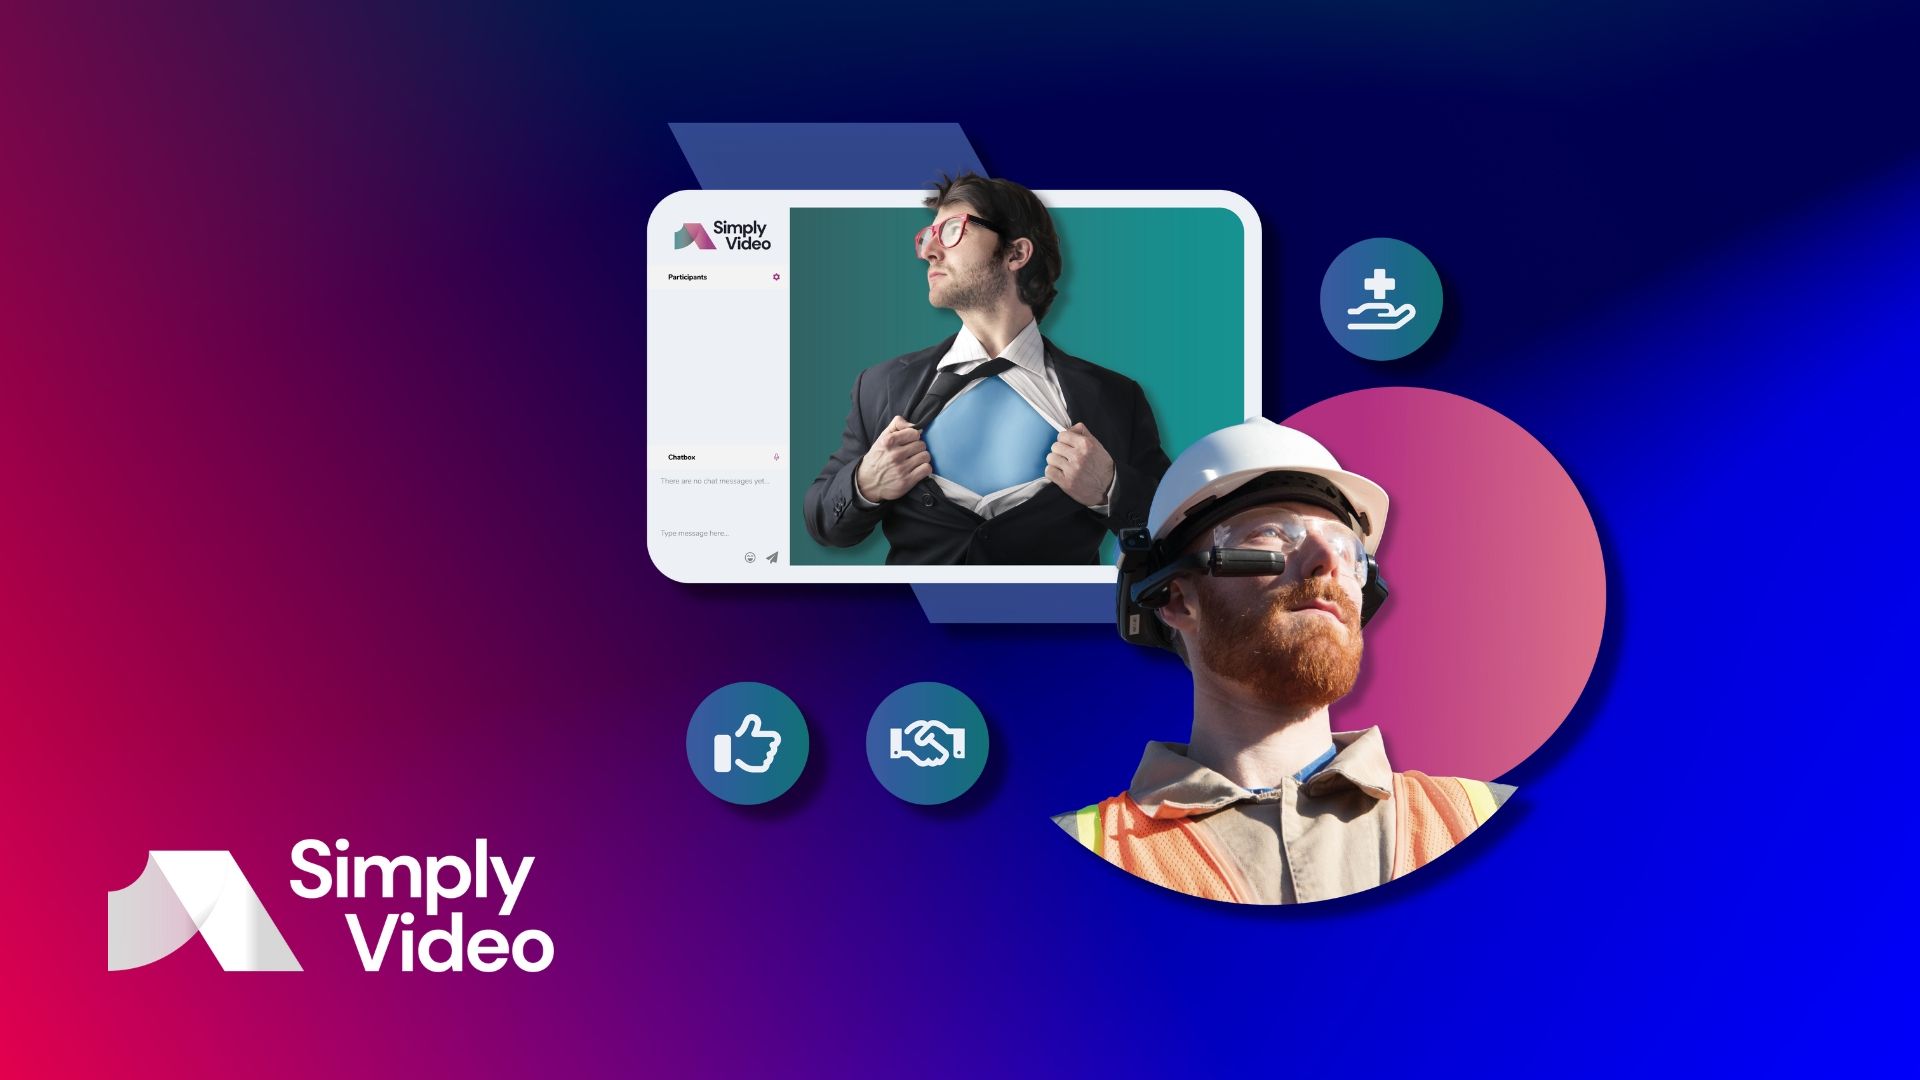 SimplyVideo supports a wide range of devices, including many industry-focused XR wearables. Let's take a closer look at some of them.